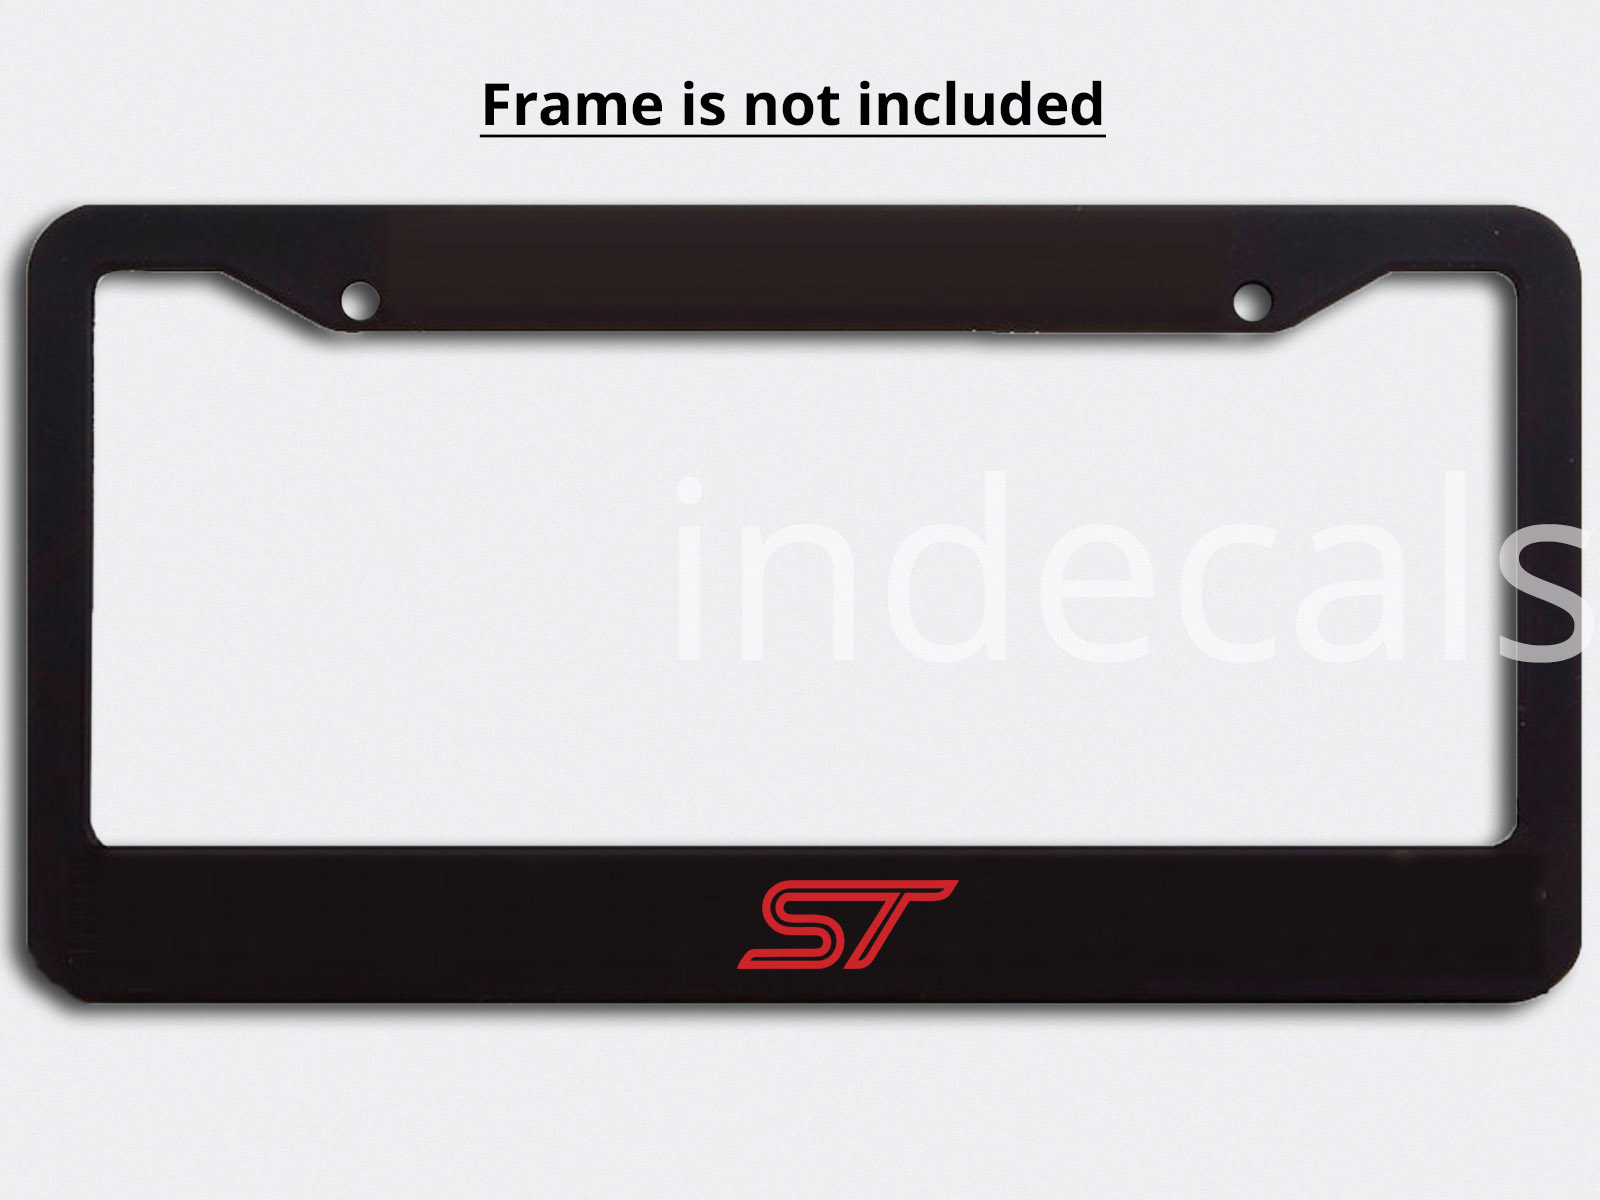 3 x Ford ST Stickers for License Plate Frame - Red